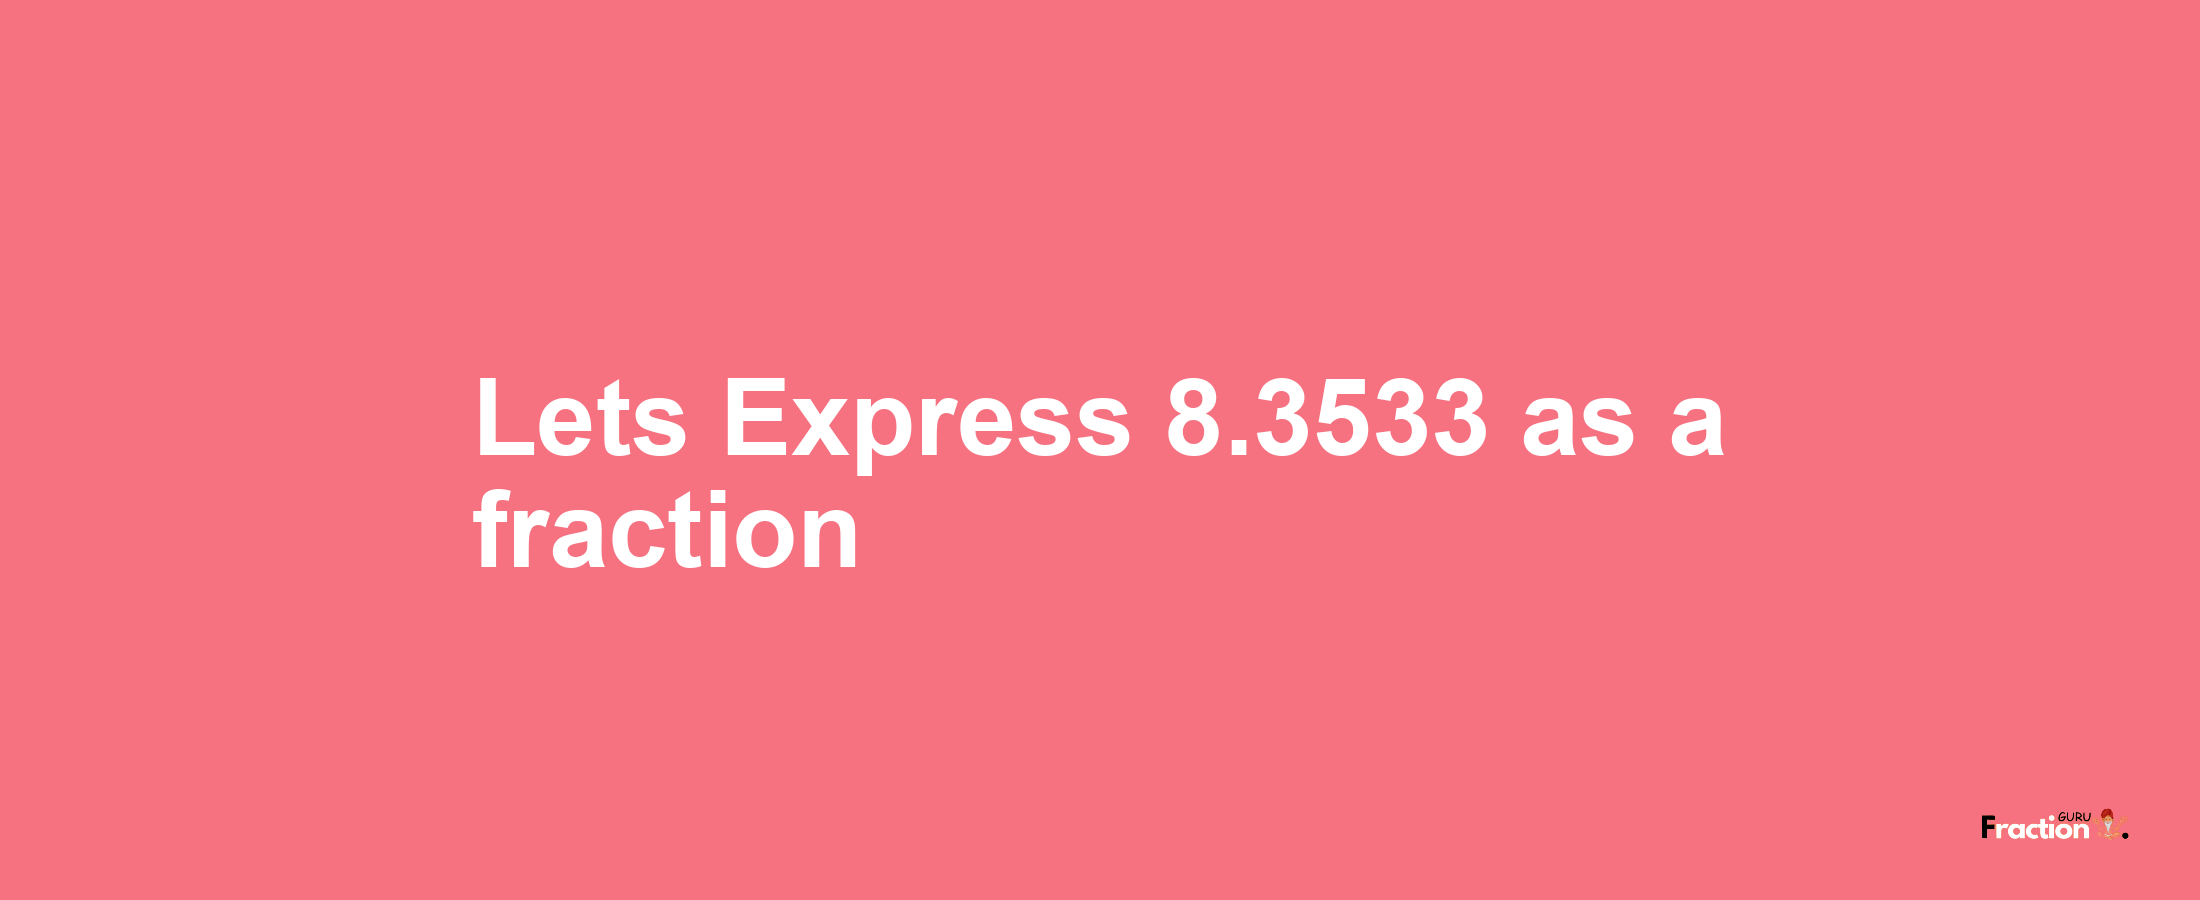 Lets Express 8.3533 as afraction